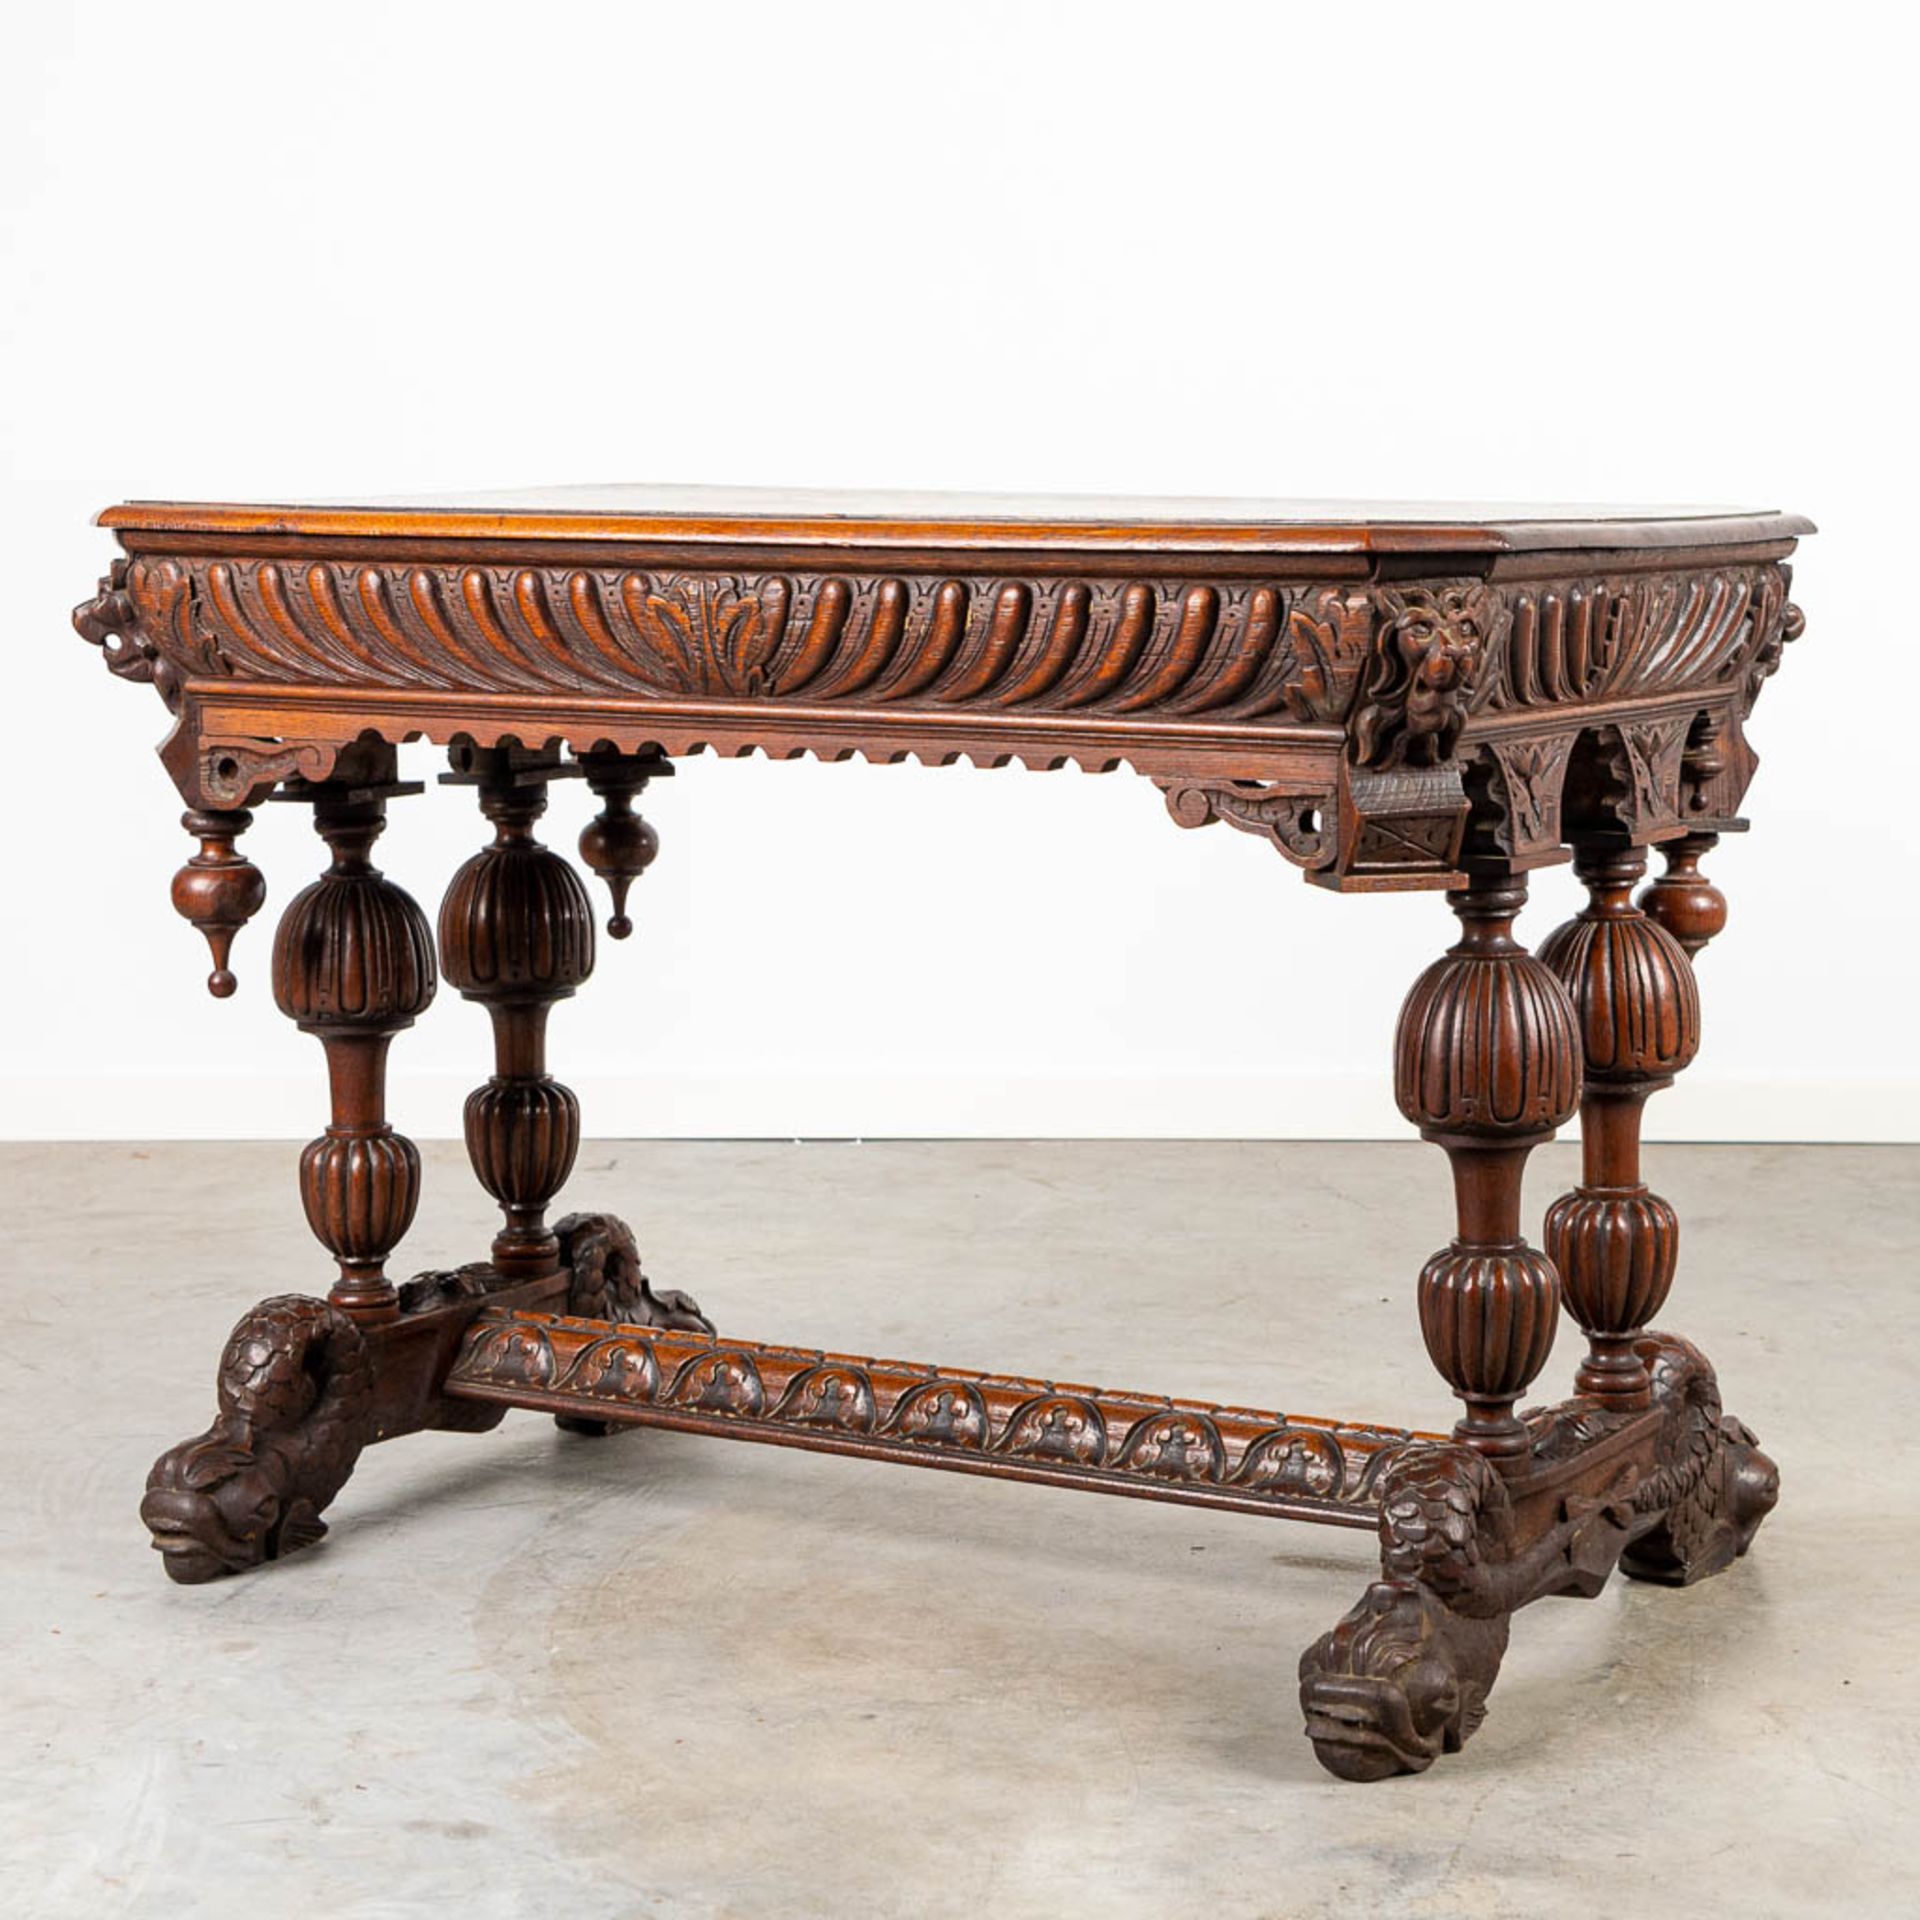 A desk made of oak and decorated with wood sculptured Dolphins.